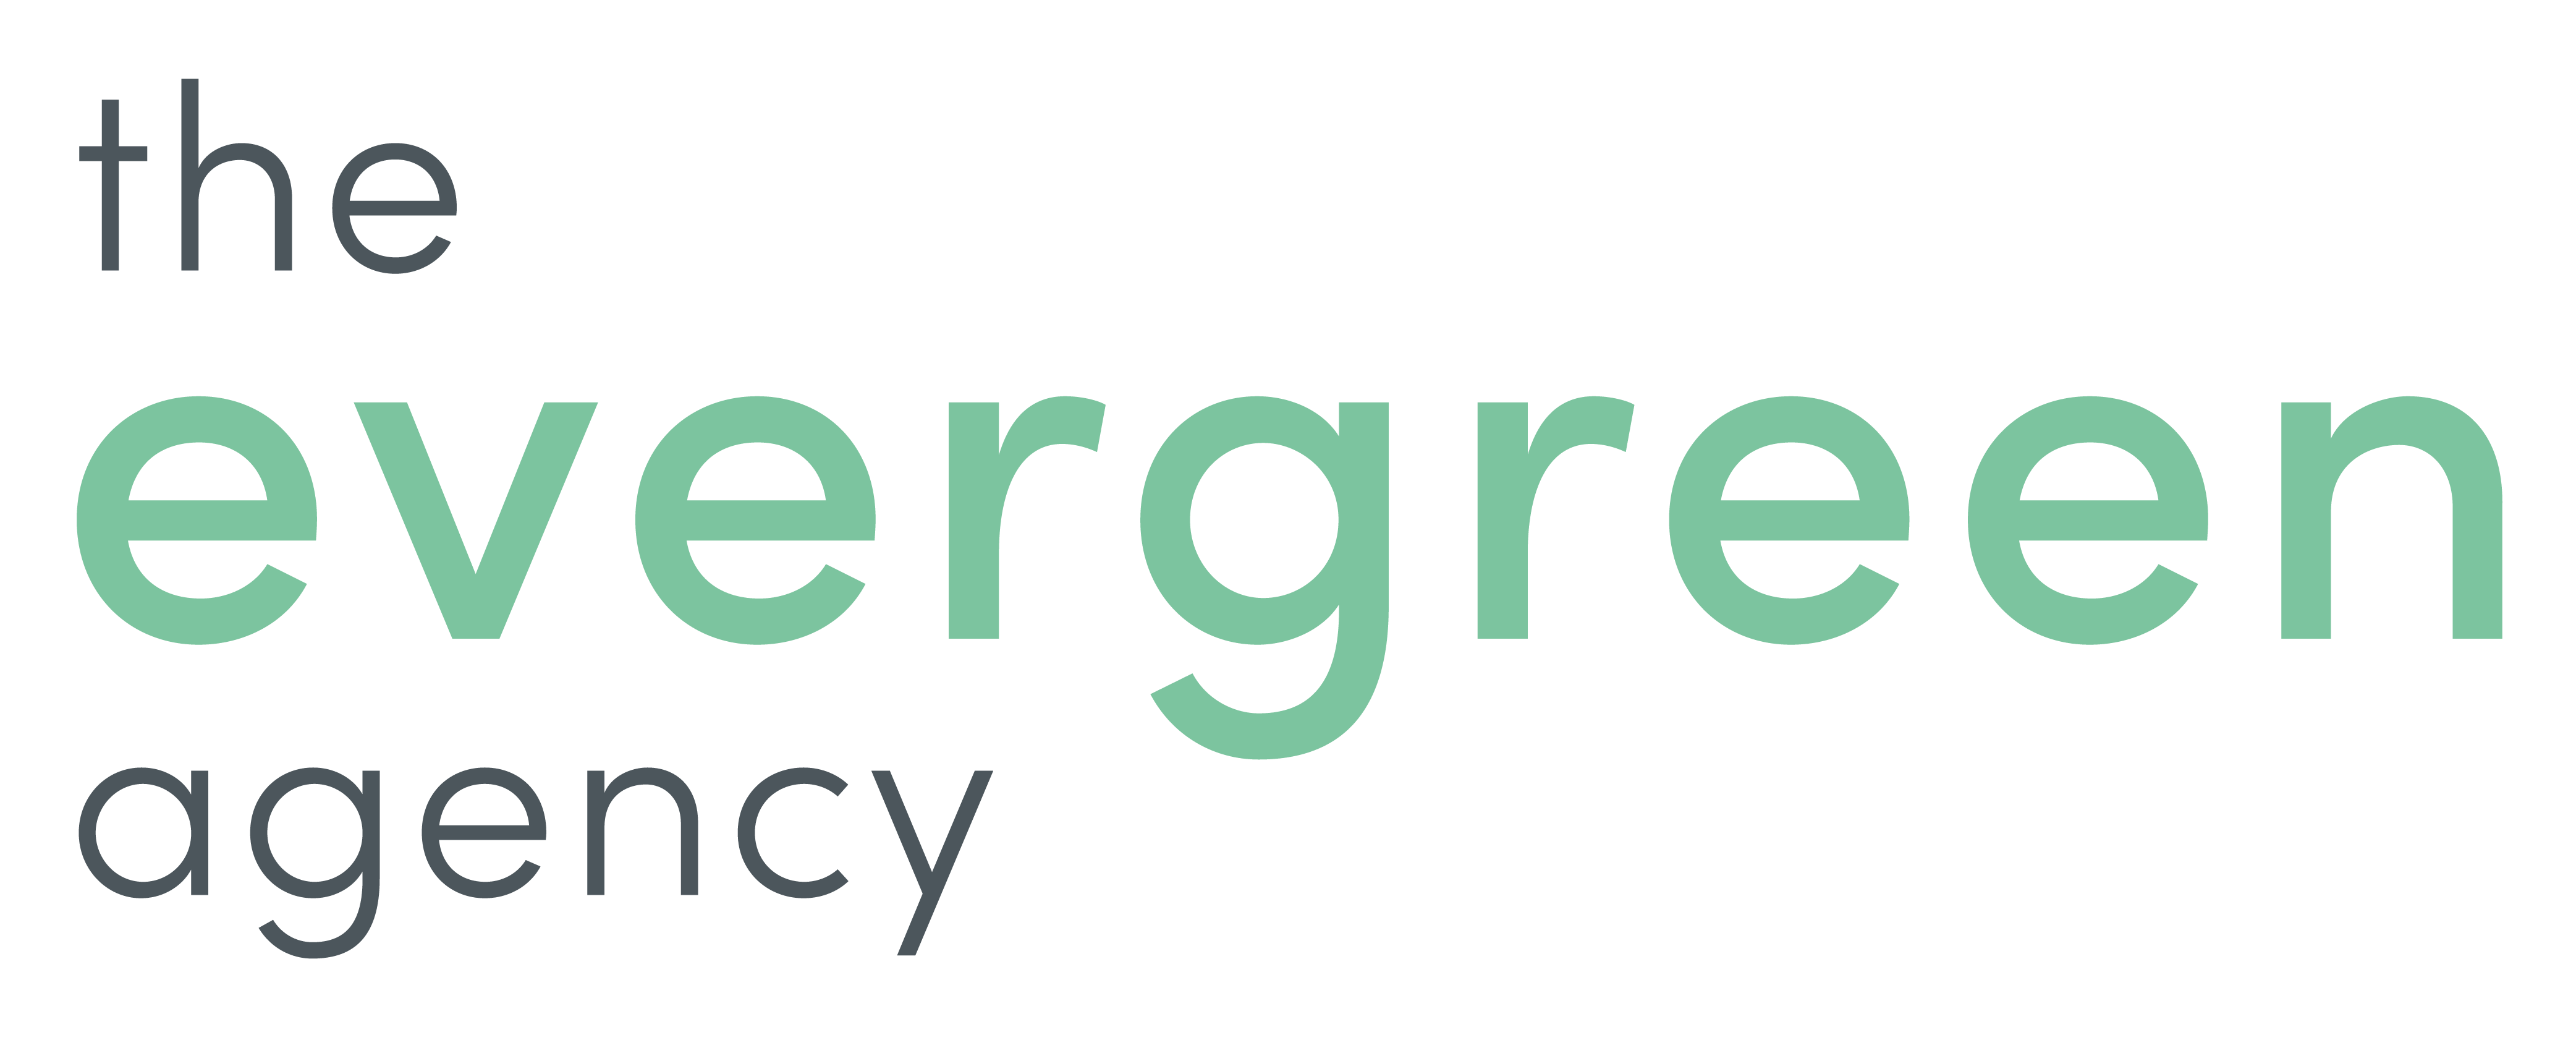 The Evergreen Agency